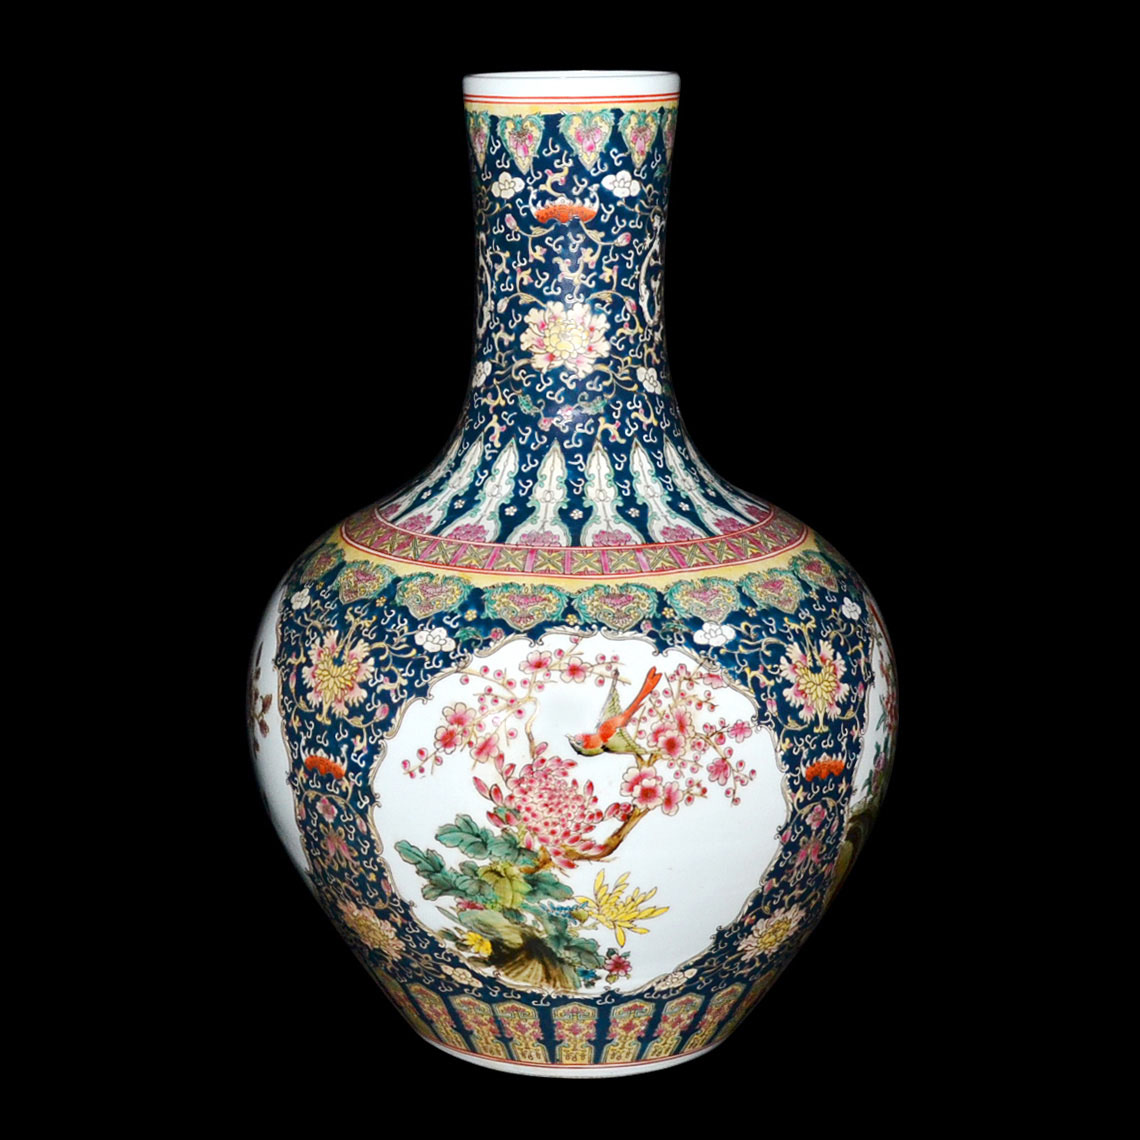 Palatial Qing Famille rose vase valued at almost $2M comes to the Gianguan Auctions podium on Saturday, September 17.